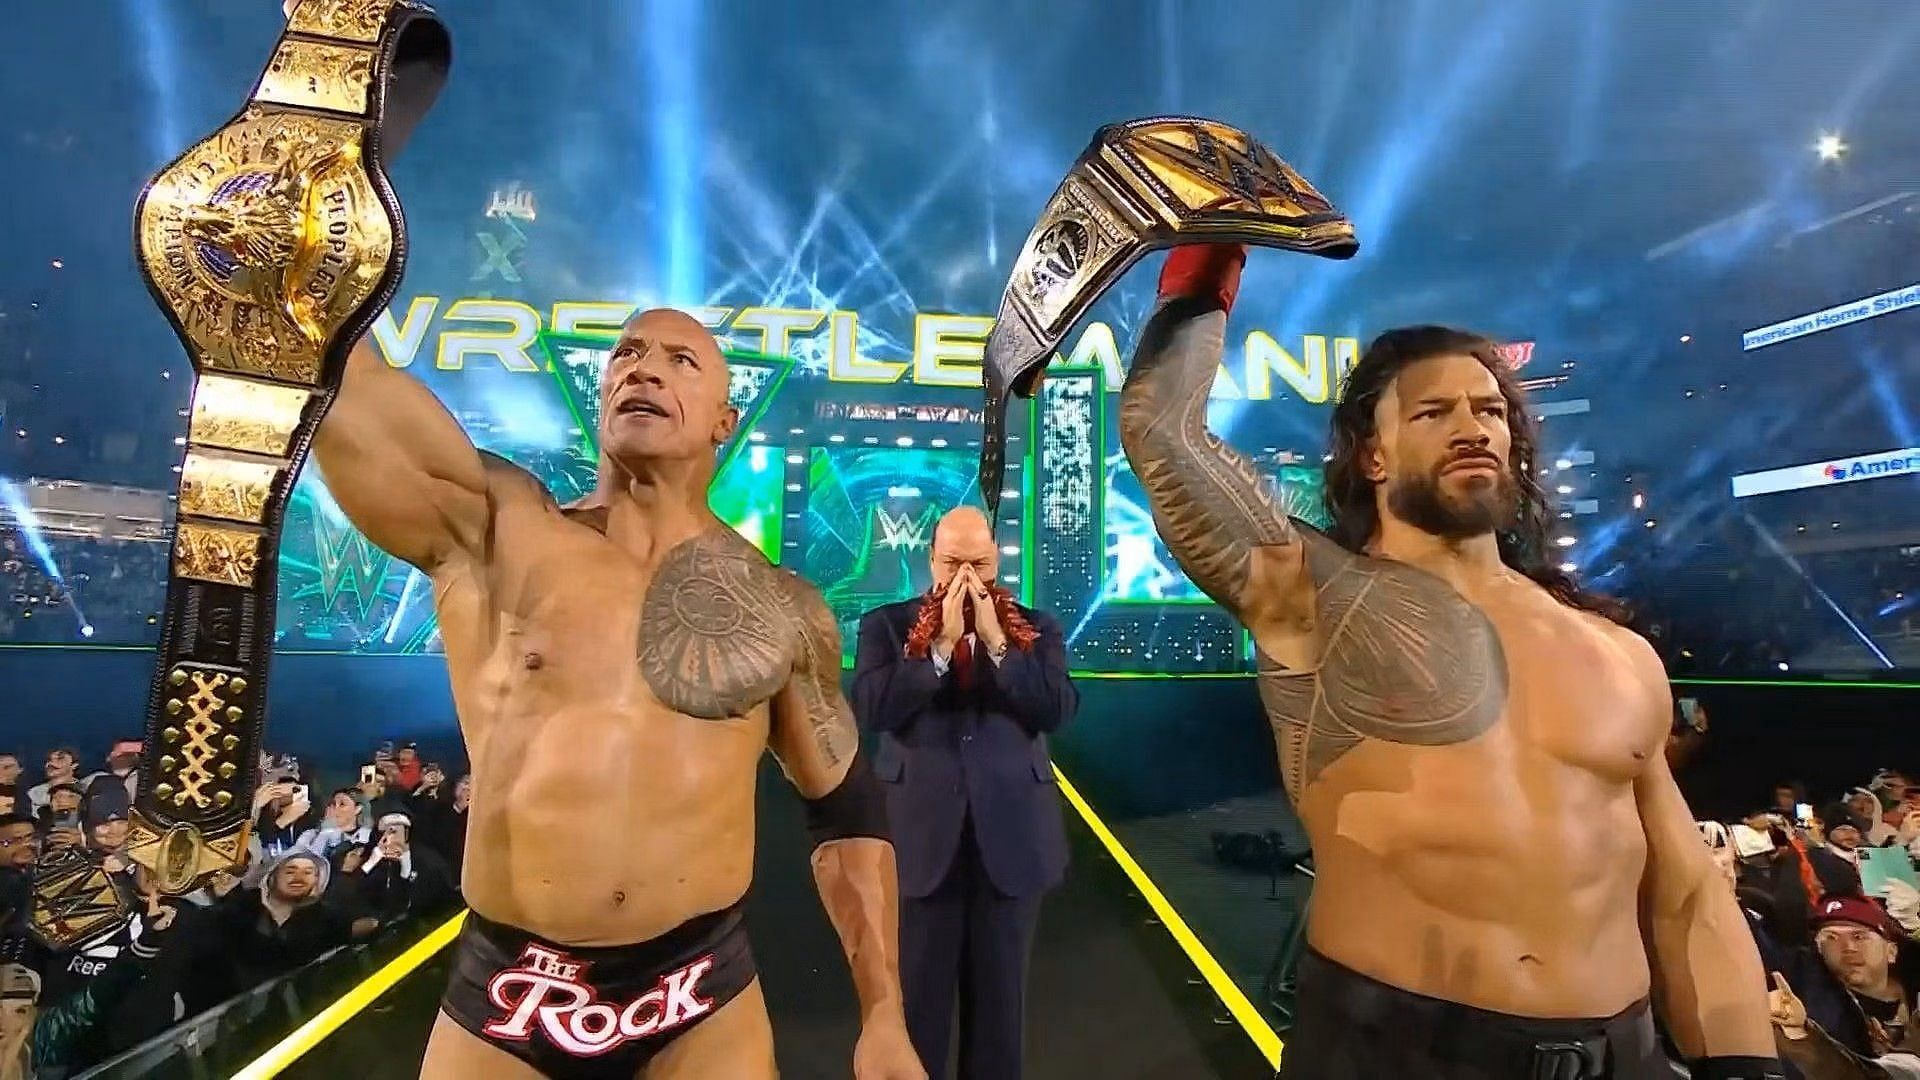 Roman Reigns and The Rock stood tall at WrestleMania XL Night One